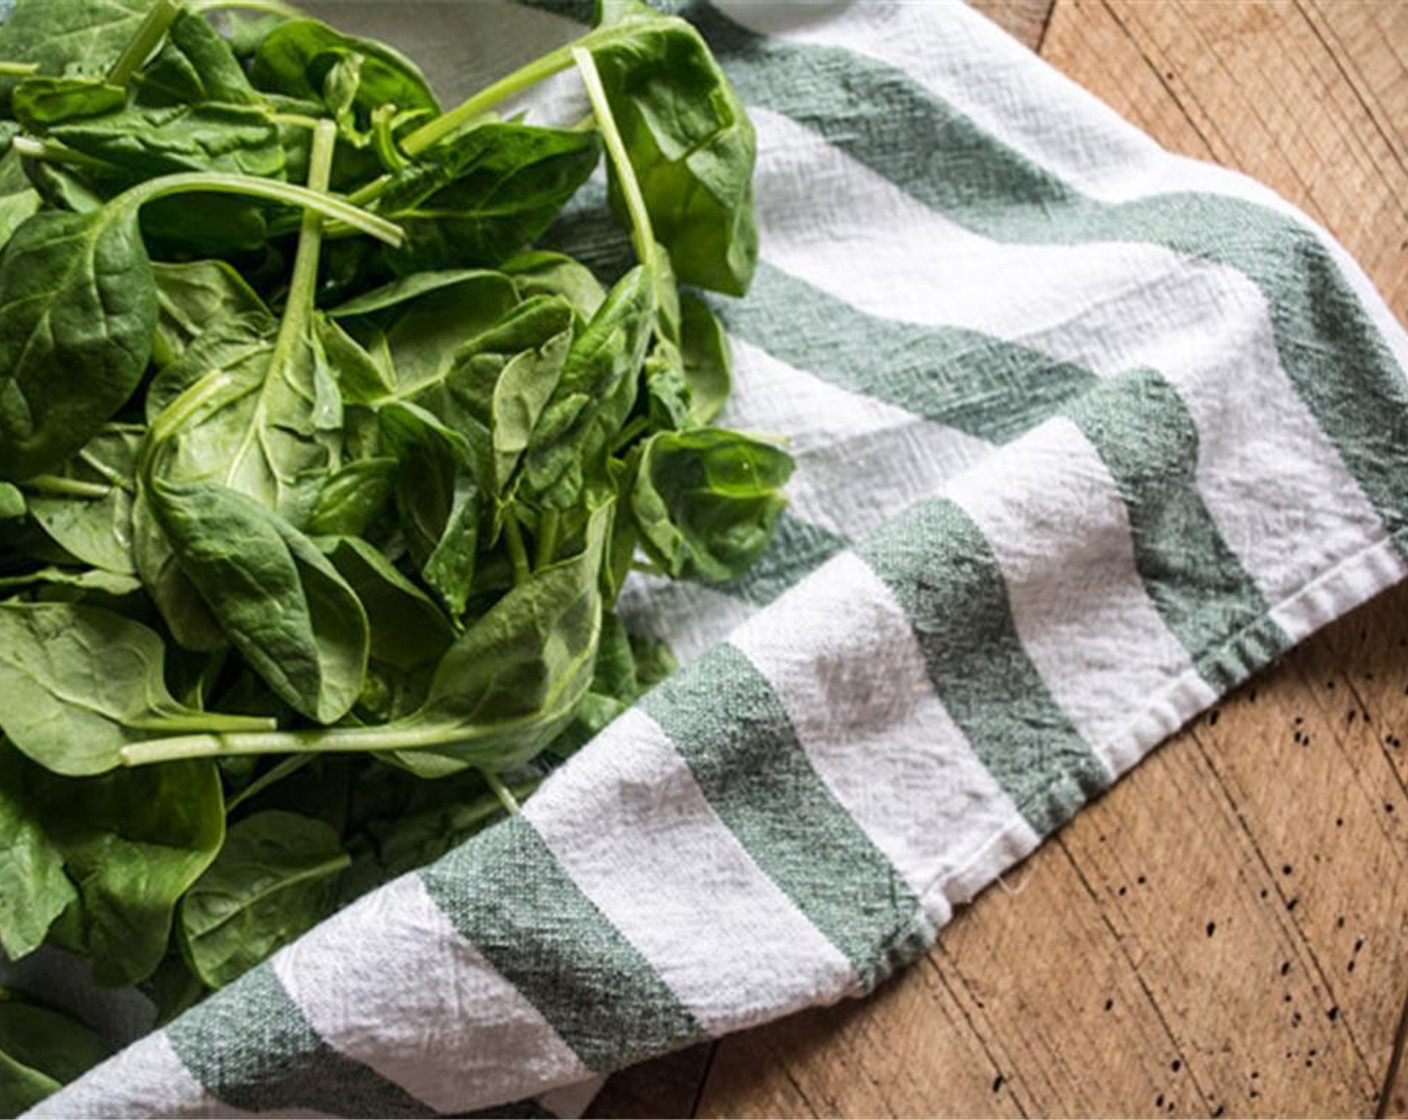 step 9 For the spinach filling, add Coconut Oil (1/2 Tbsp) to medium saucepan, once oil is hot, add in Fresh Spinach (4 cups) and cook until leaves are wilted, stirring frequently. Remove cooked spinach from heat and set aside to cool.